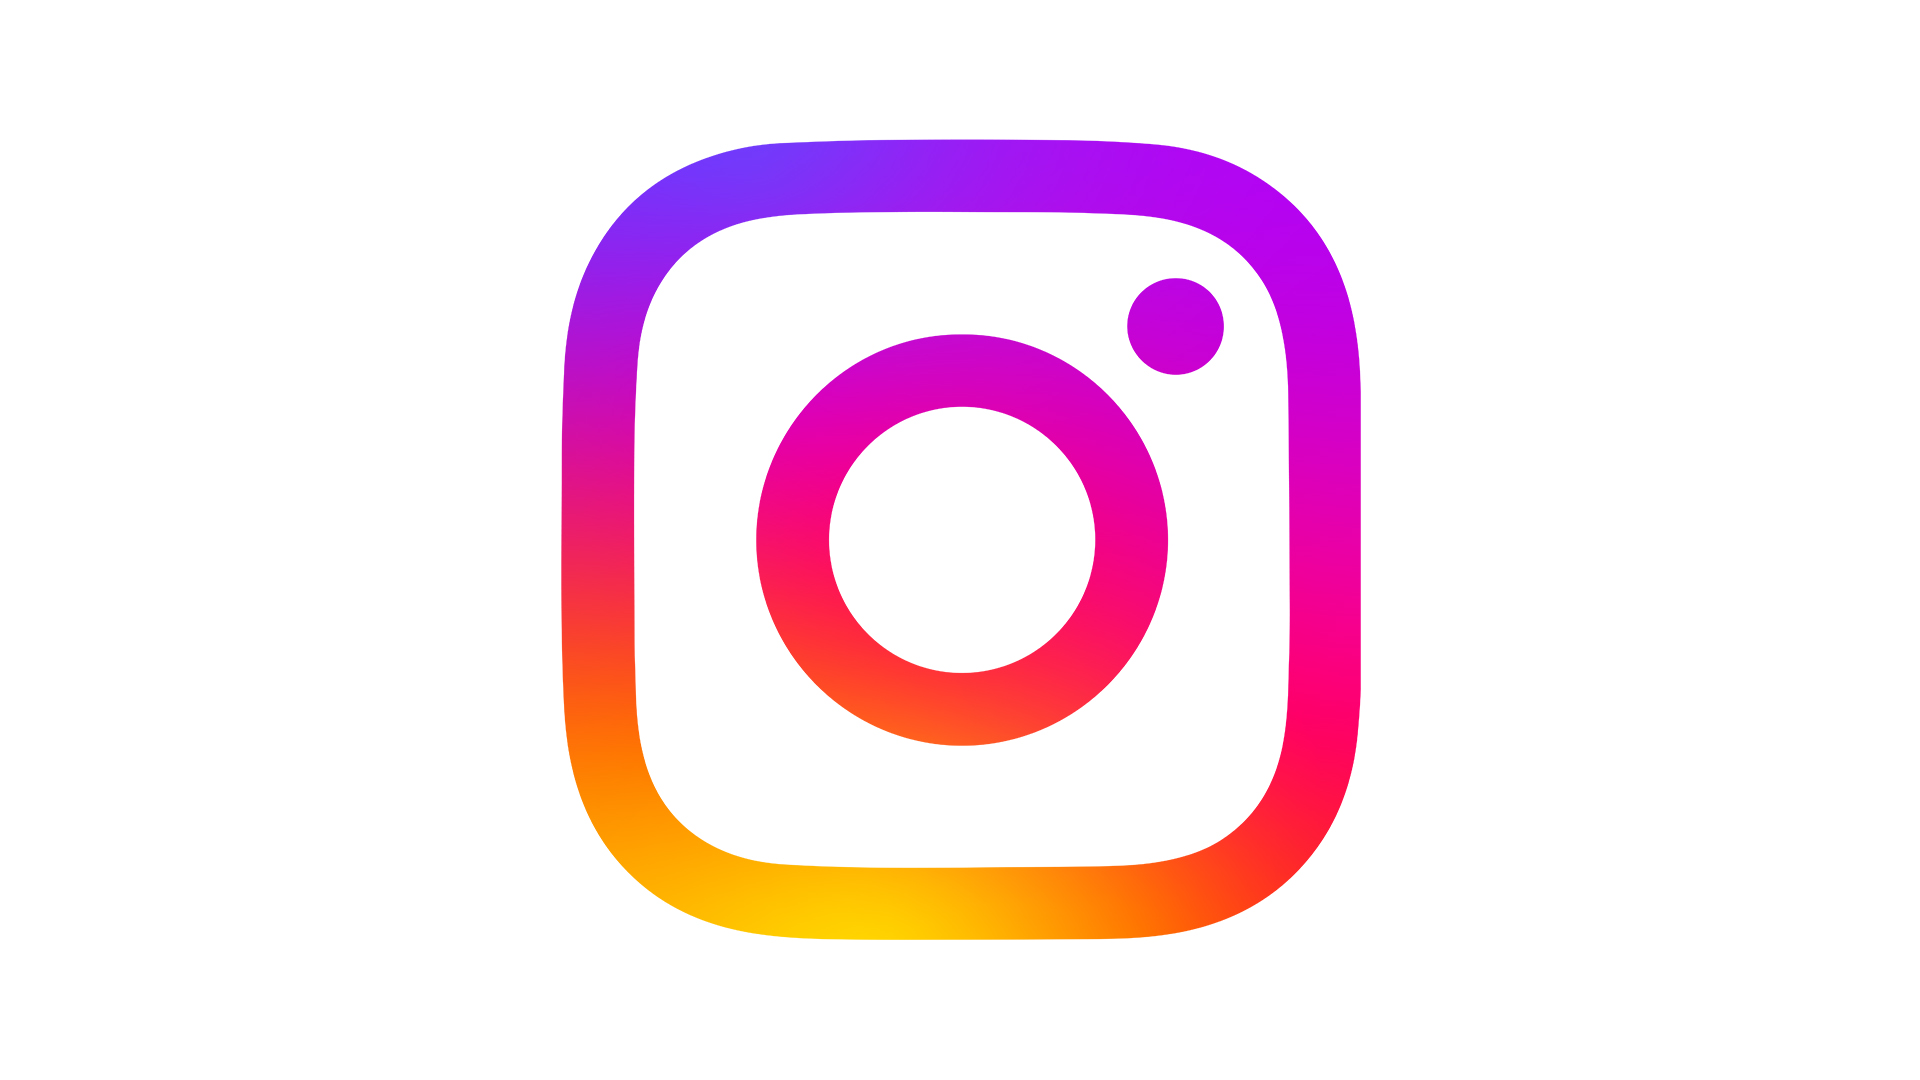 The Instagram logo: a history